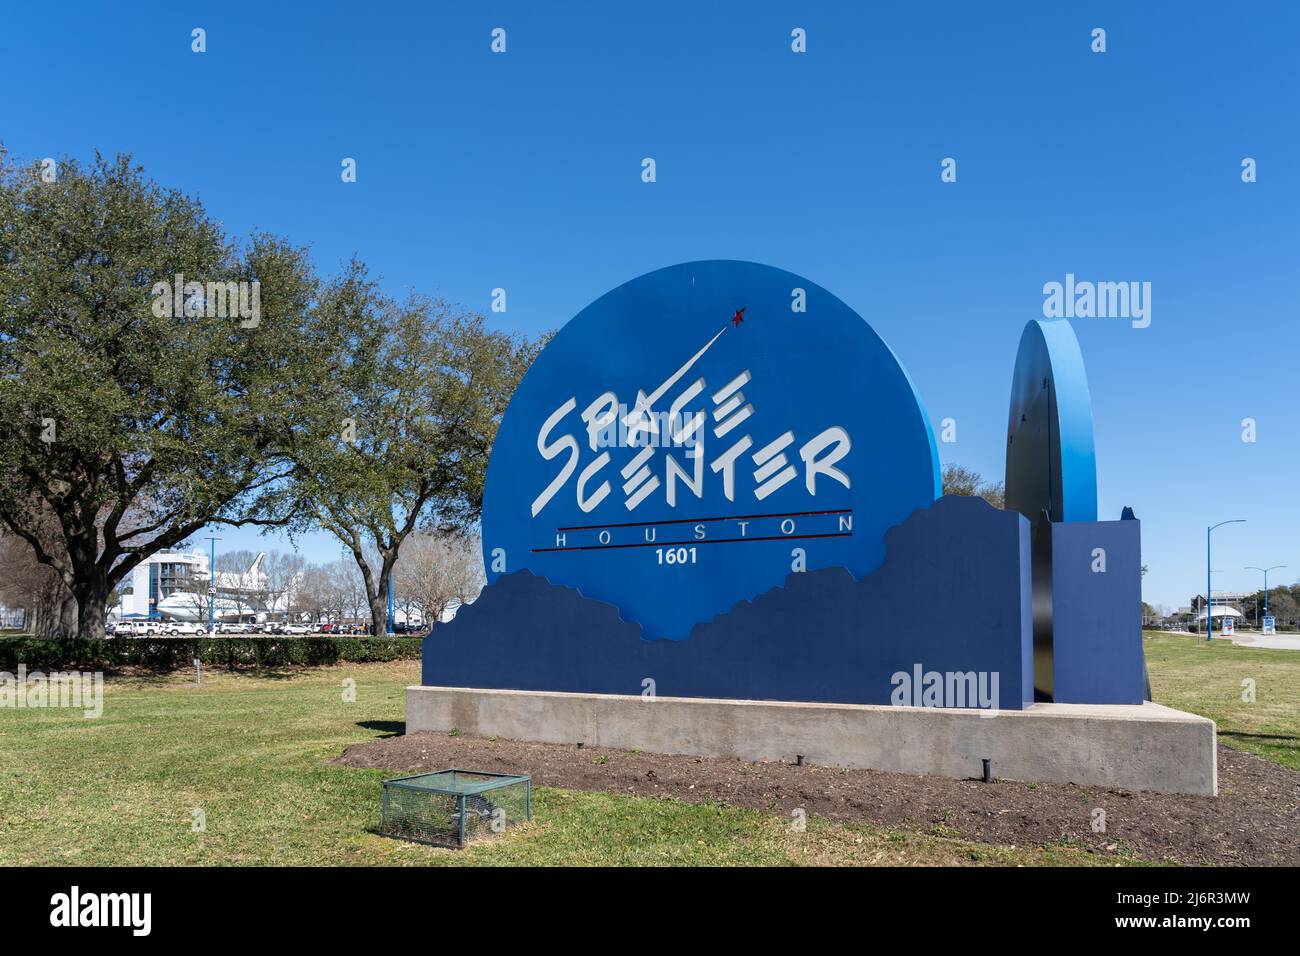 Houston, TX, USA - March 12, 2022: Space Center Houston sign is seen on March 12, 2022.  Space Center Houston is a science and space center. Stock Photo